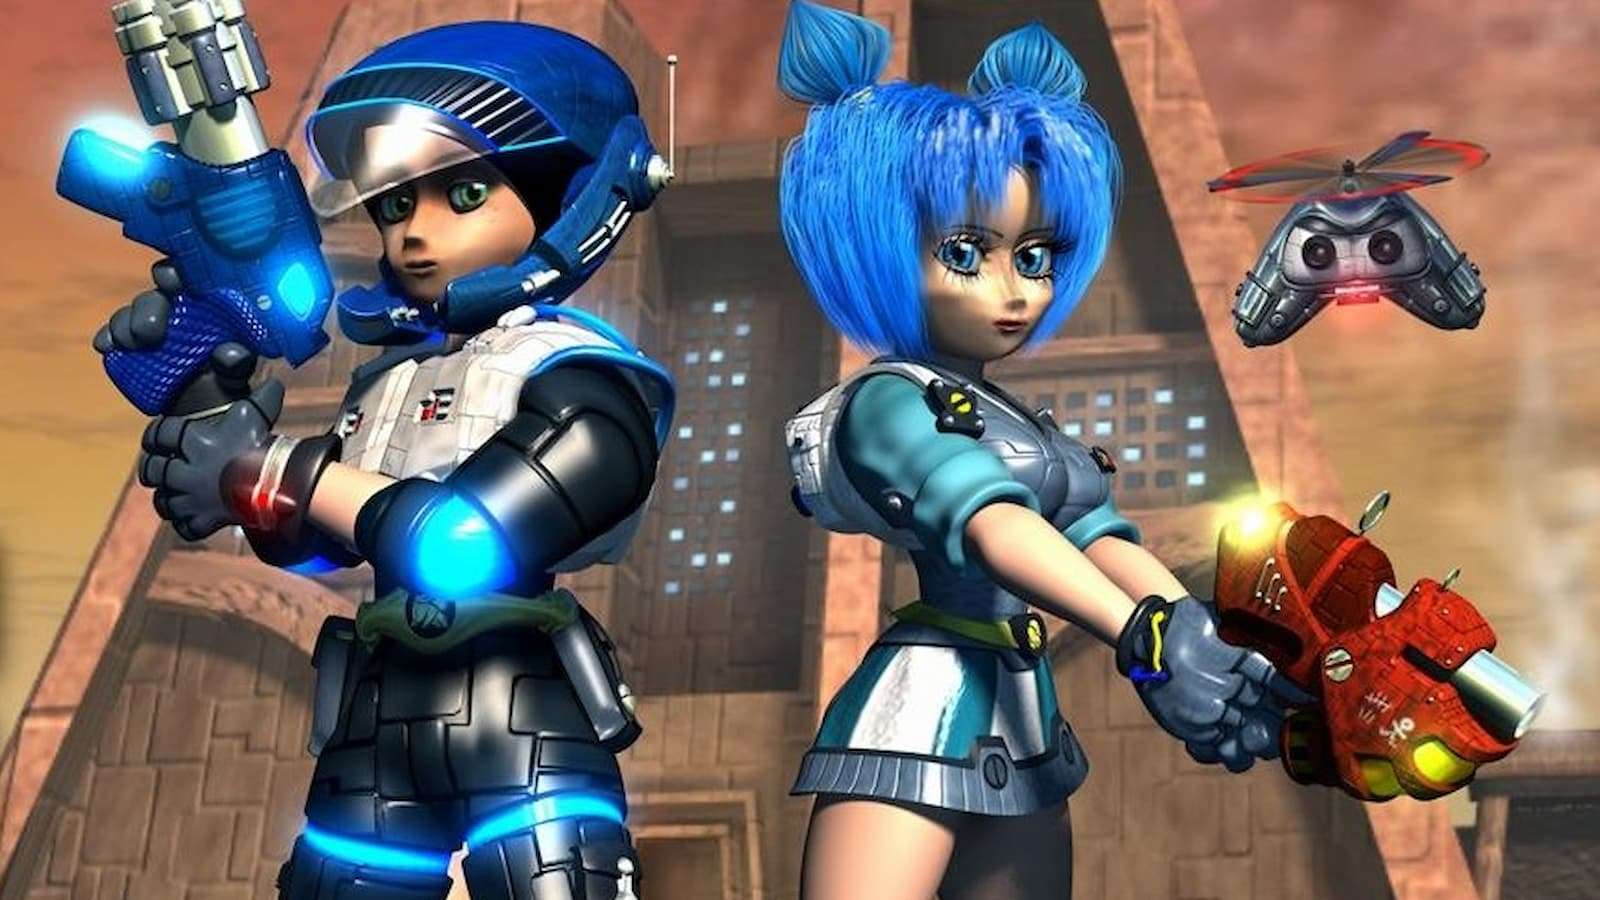 Juno and Vela from Jet Force Gemini